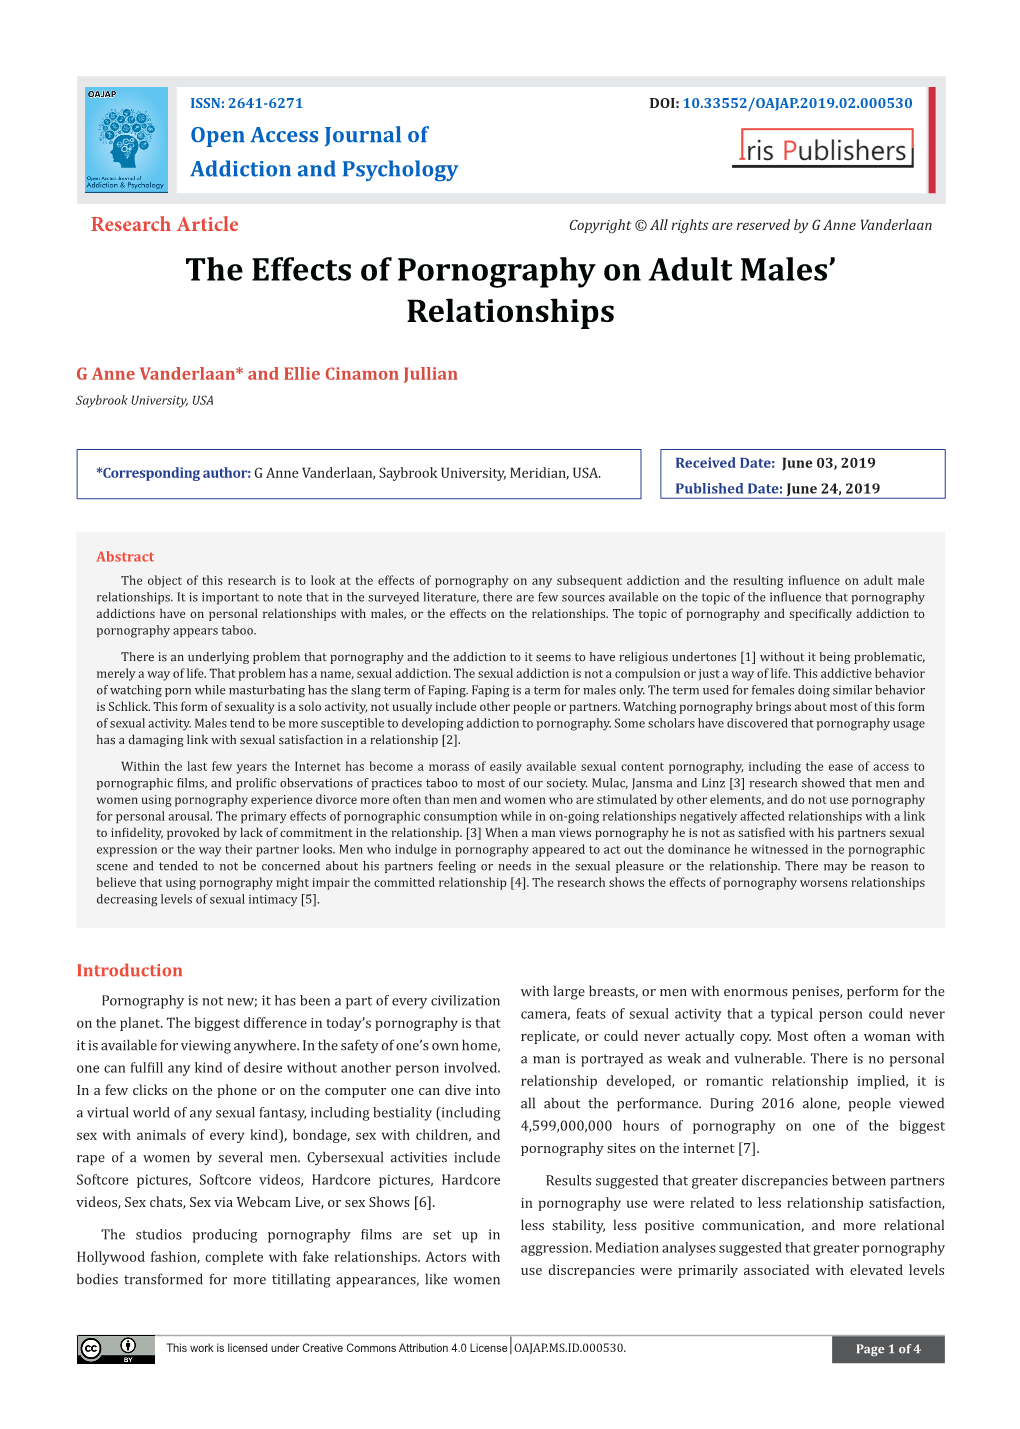 The Effects of Pornography on Adult Males' Relationships